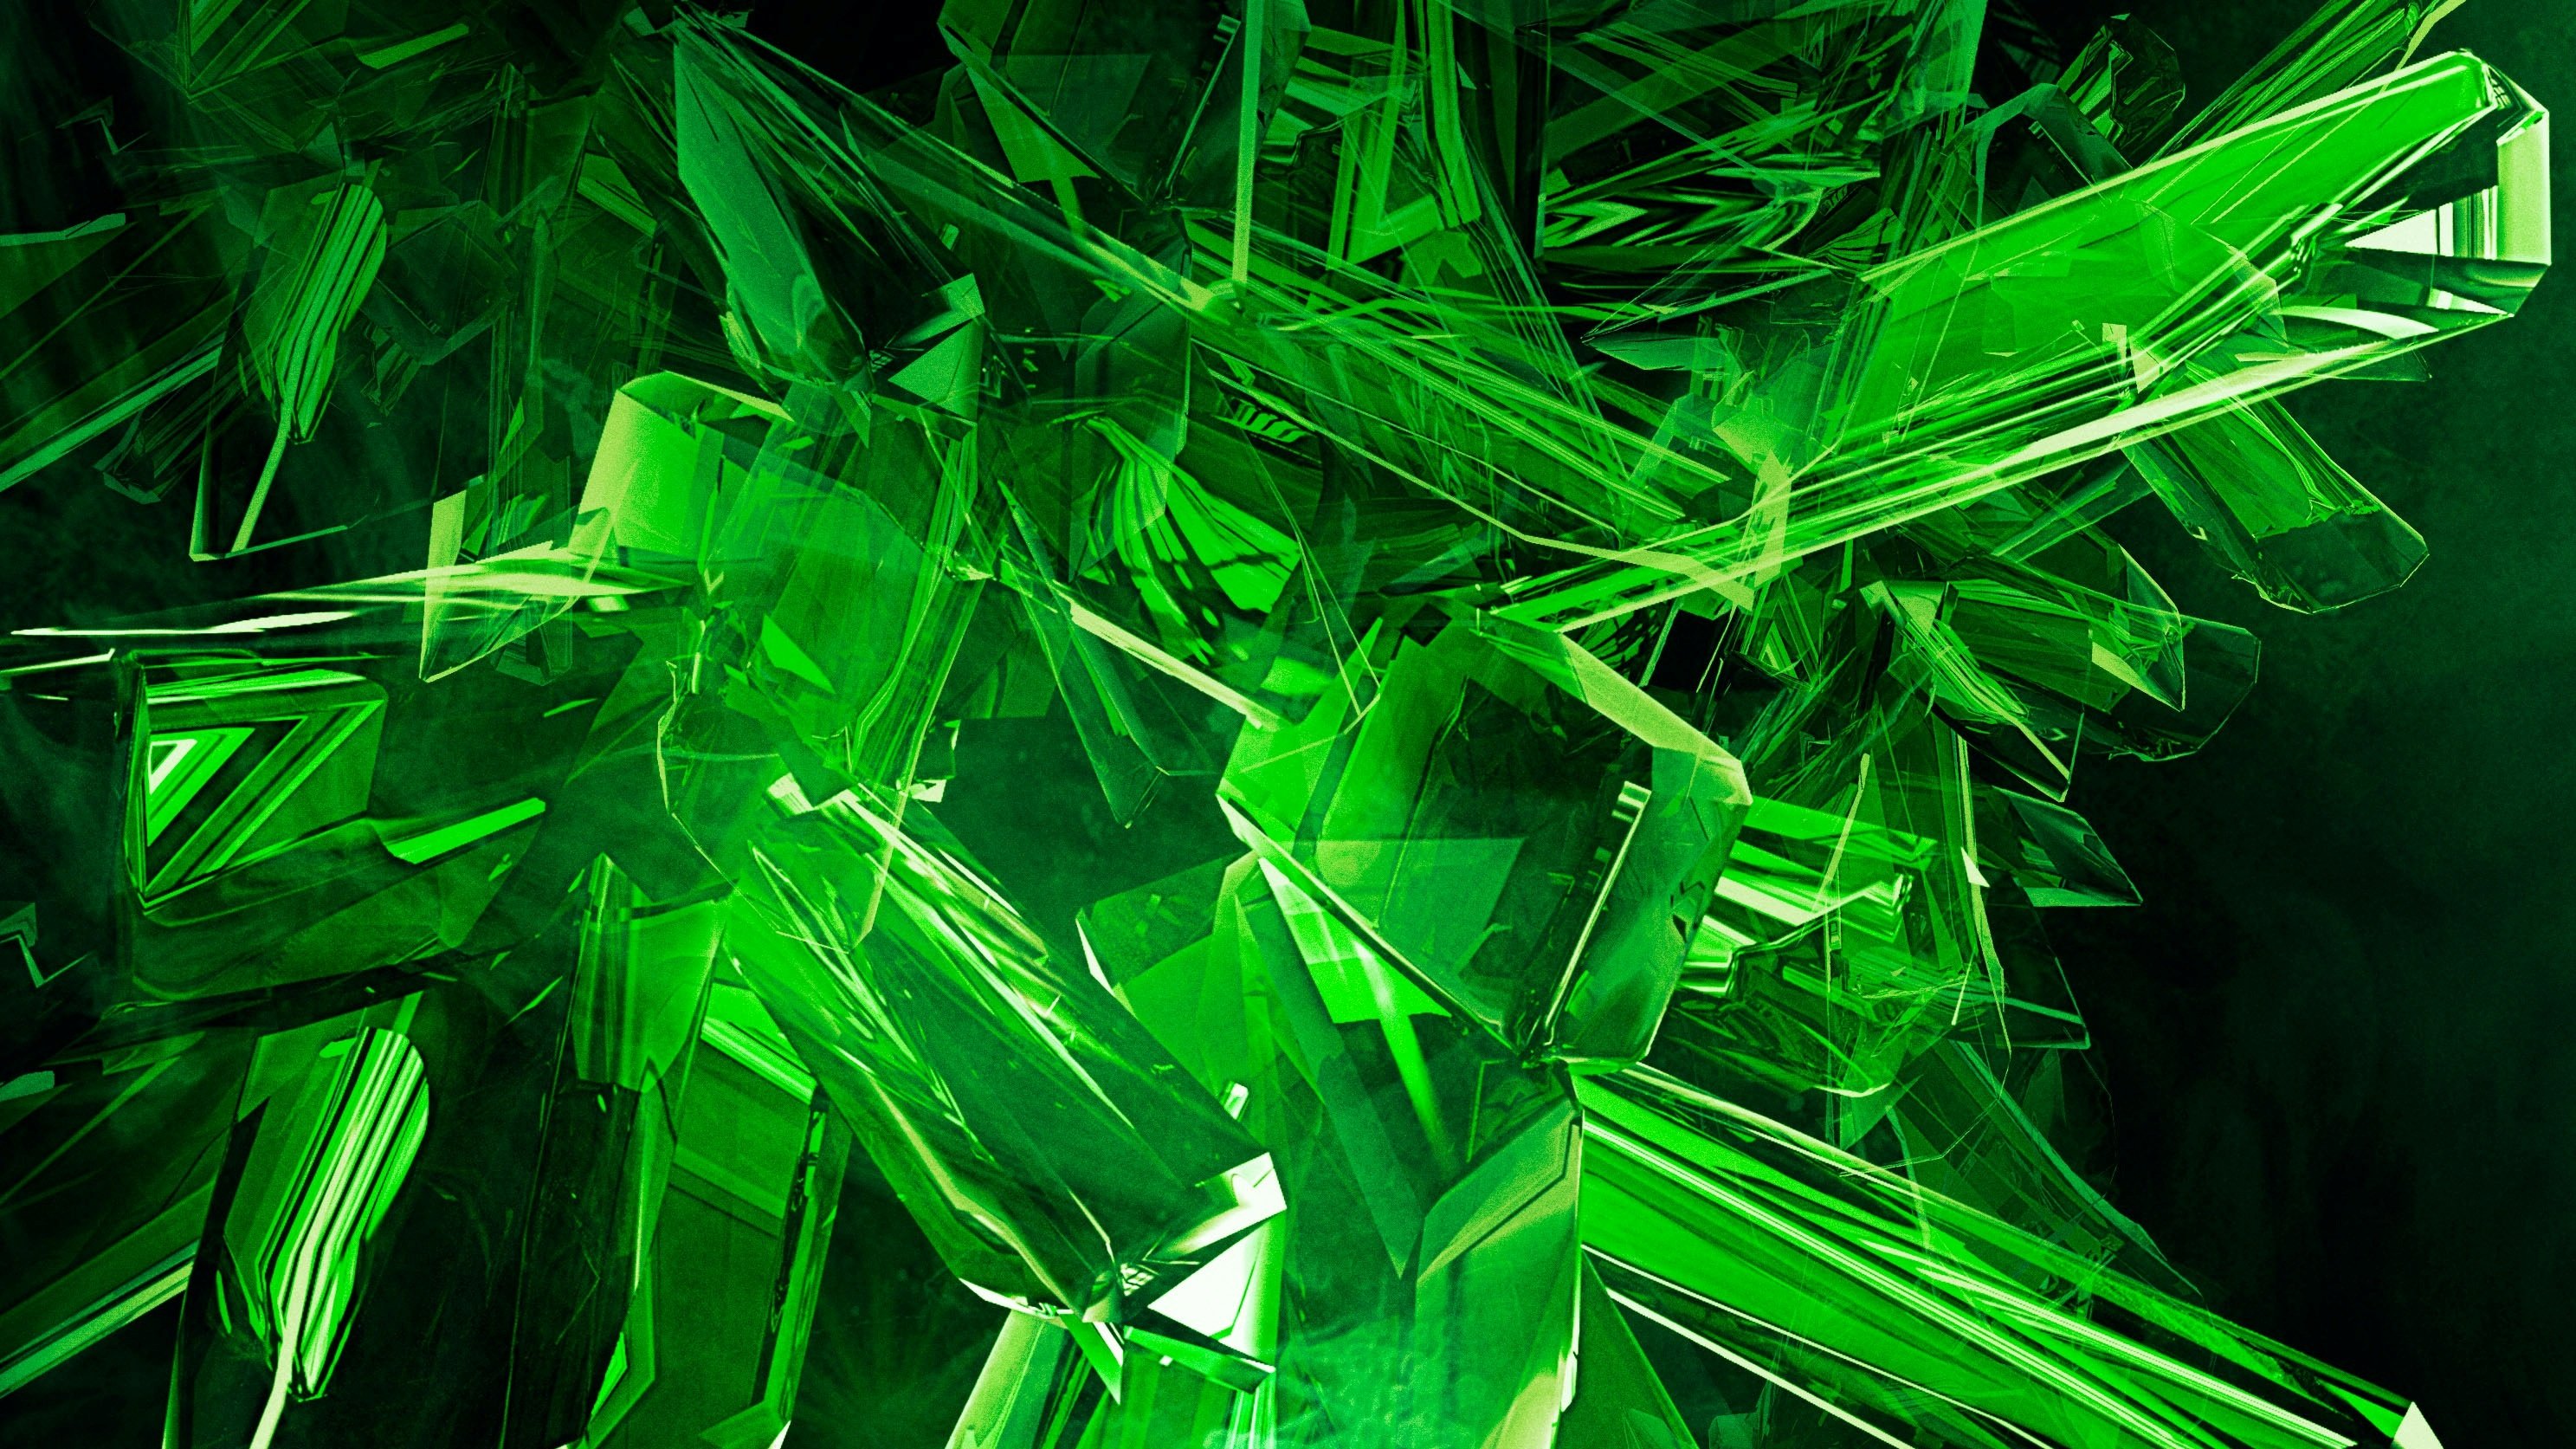 Free download hd wallpapers 14591 Image Green View Abstract Gems Cool HD Wa...